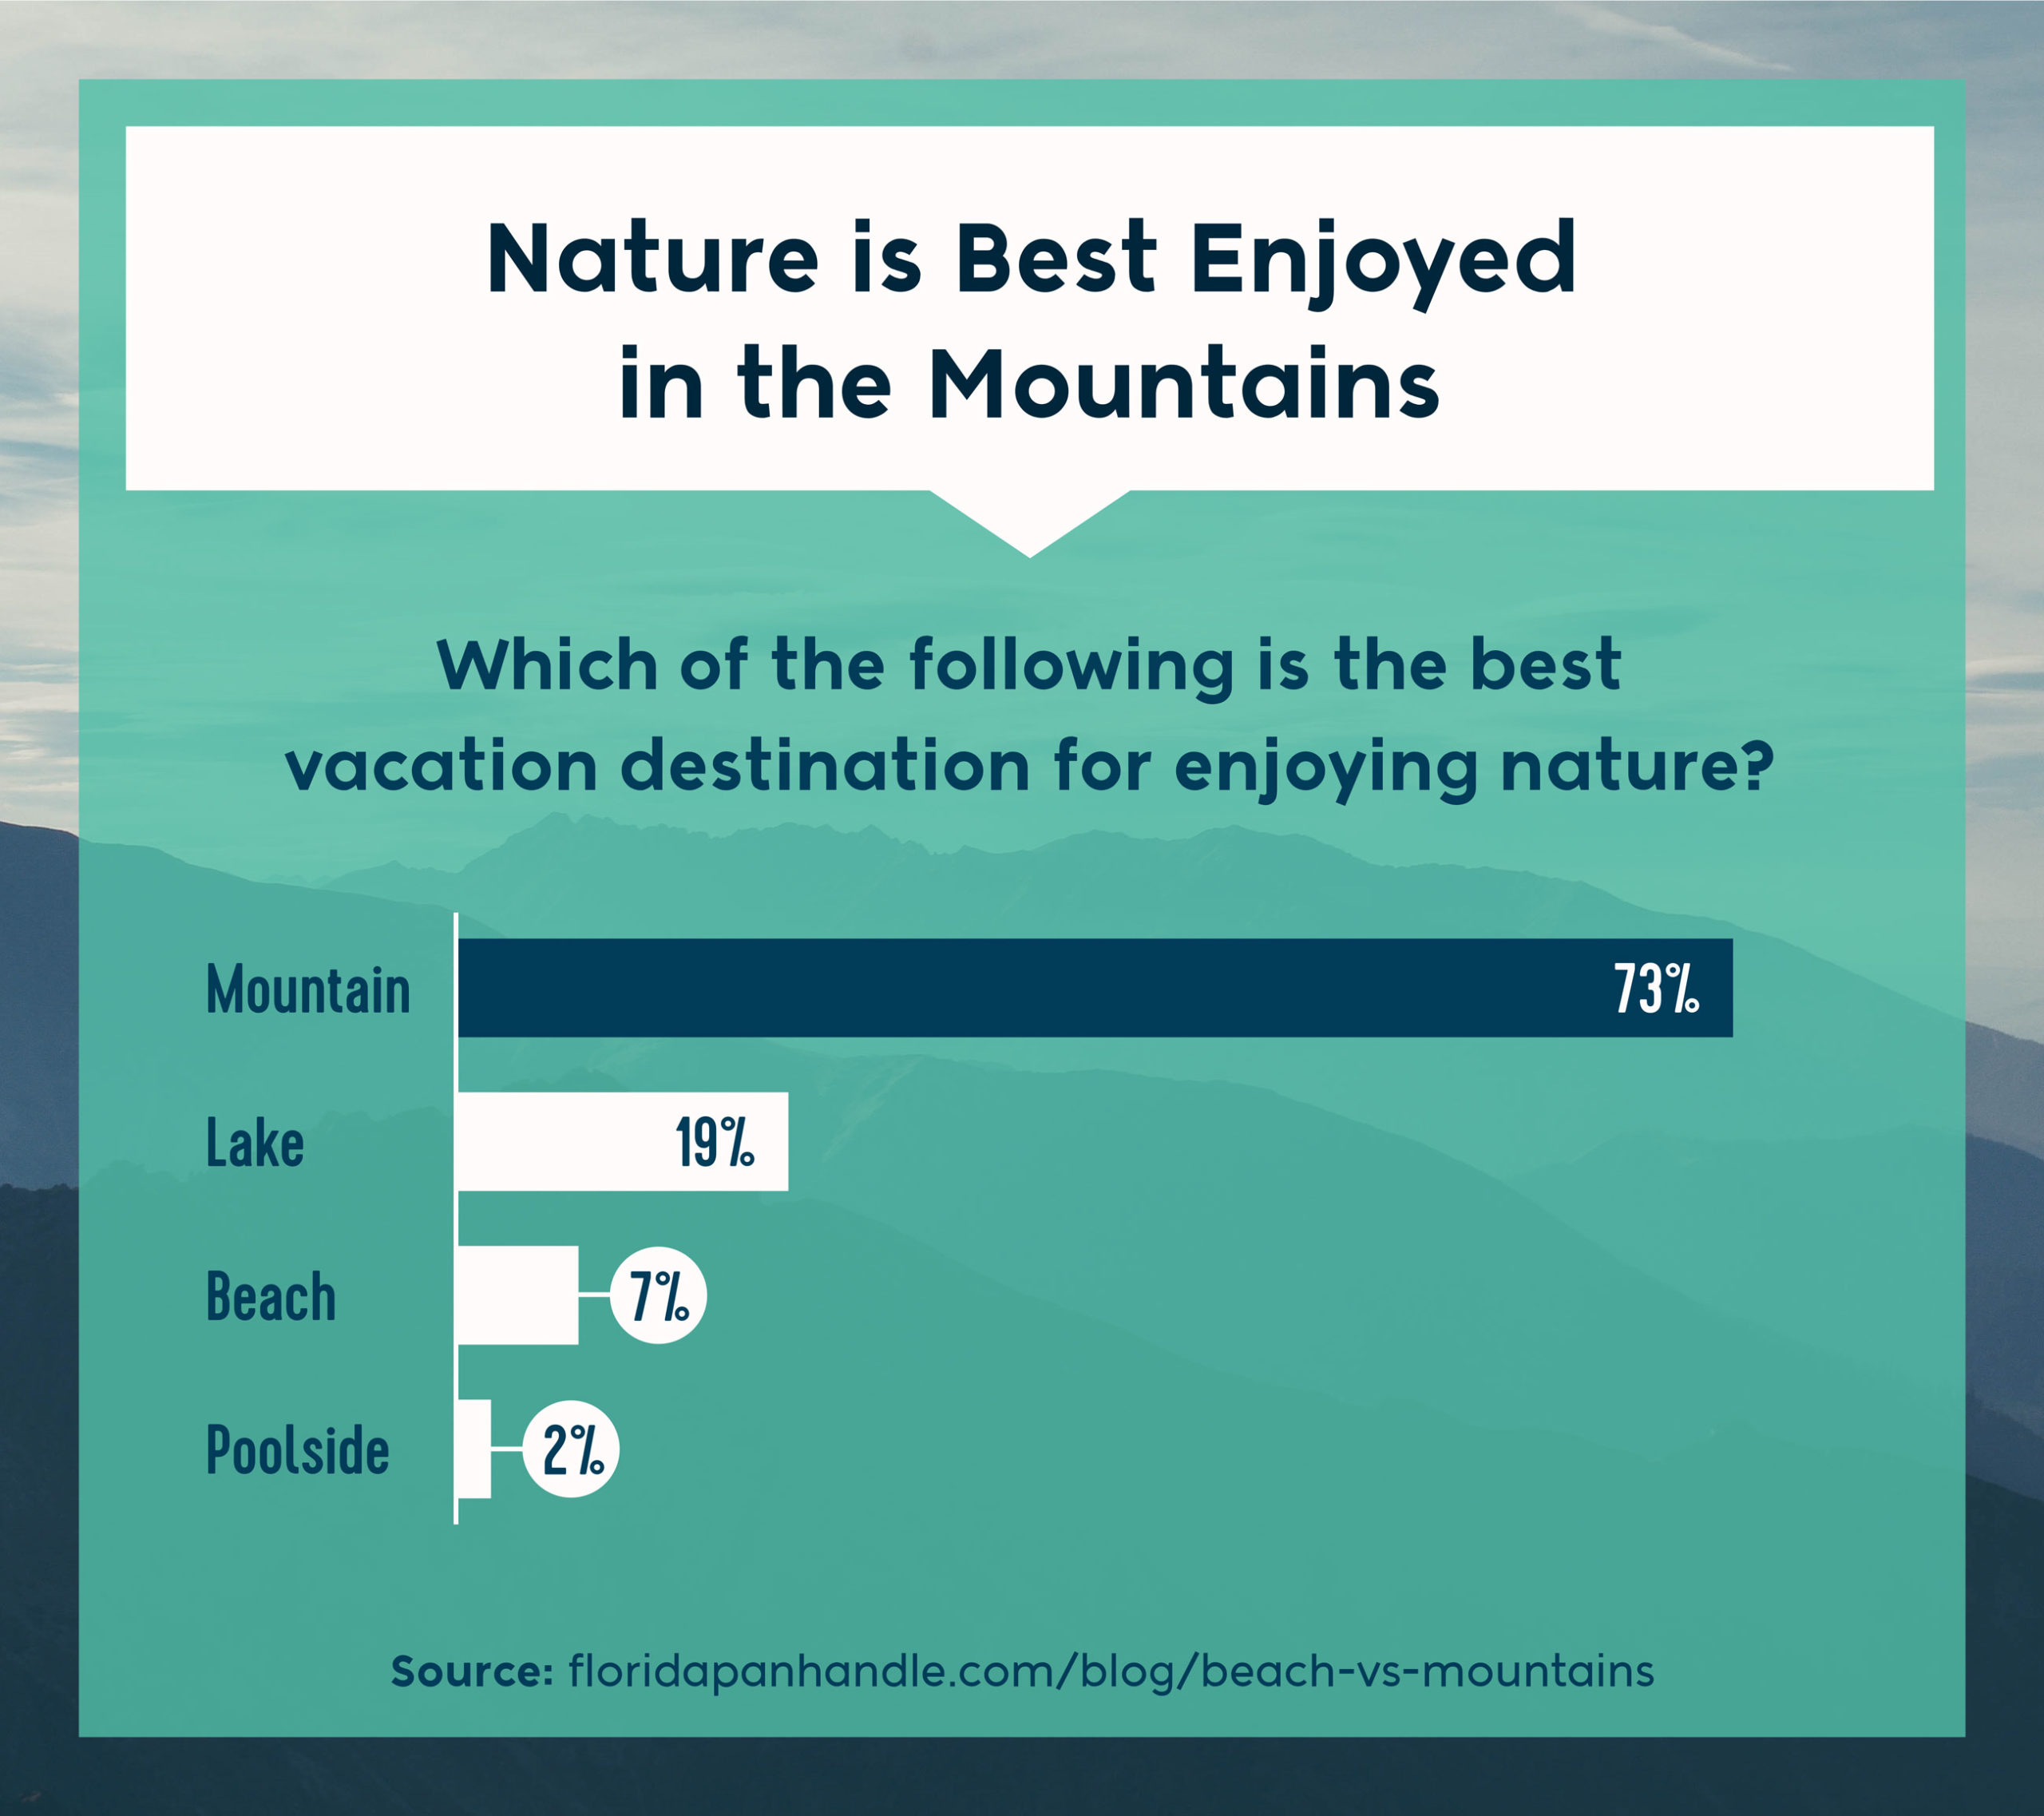 which of the following is the best vacation destination for enjoying nature - mountain, lake, beach or poolside